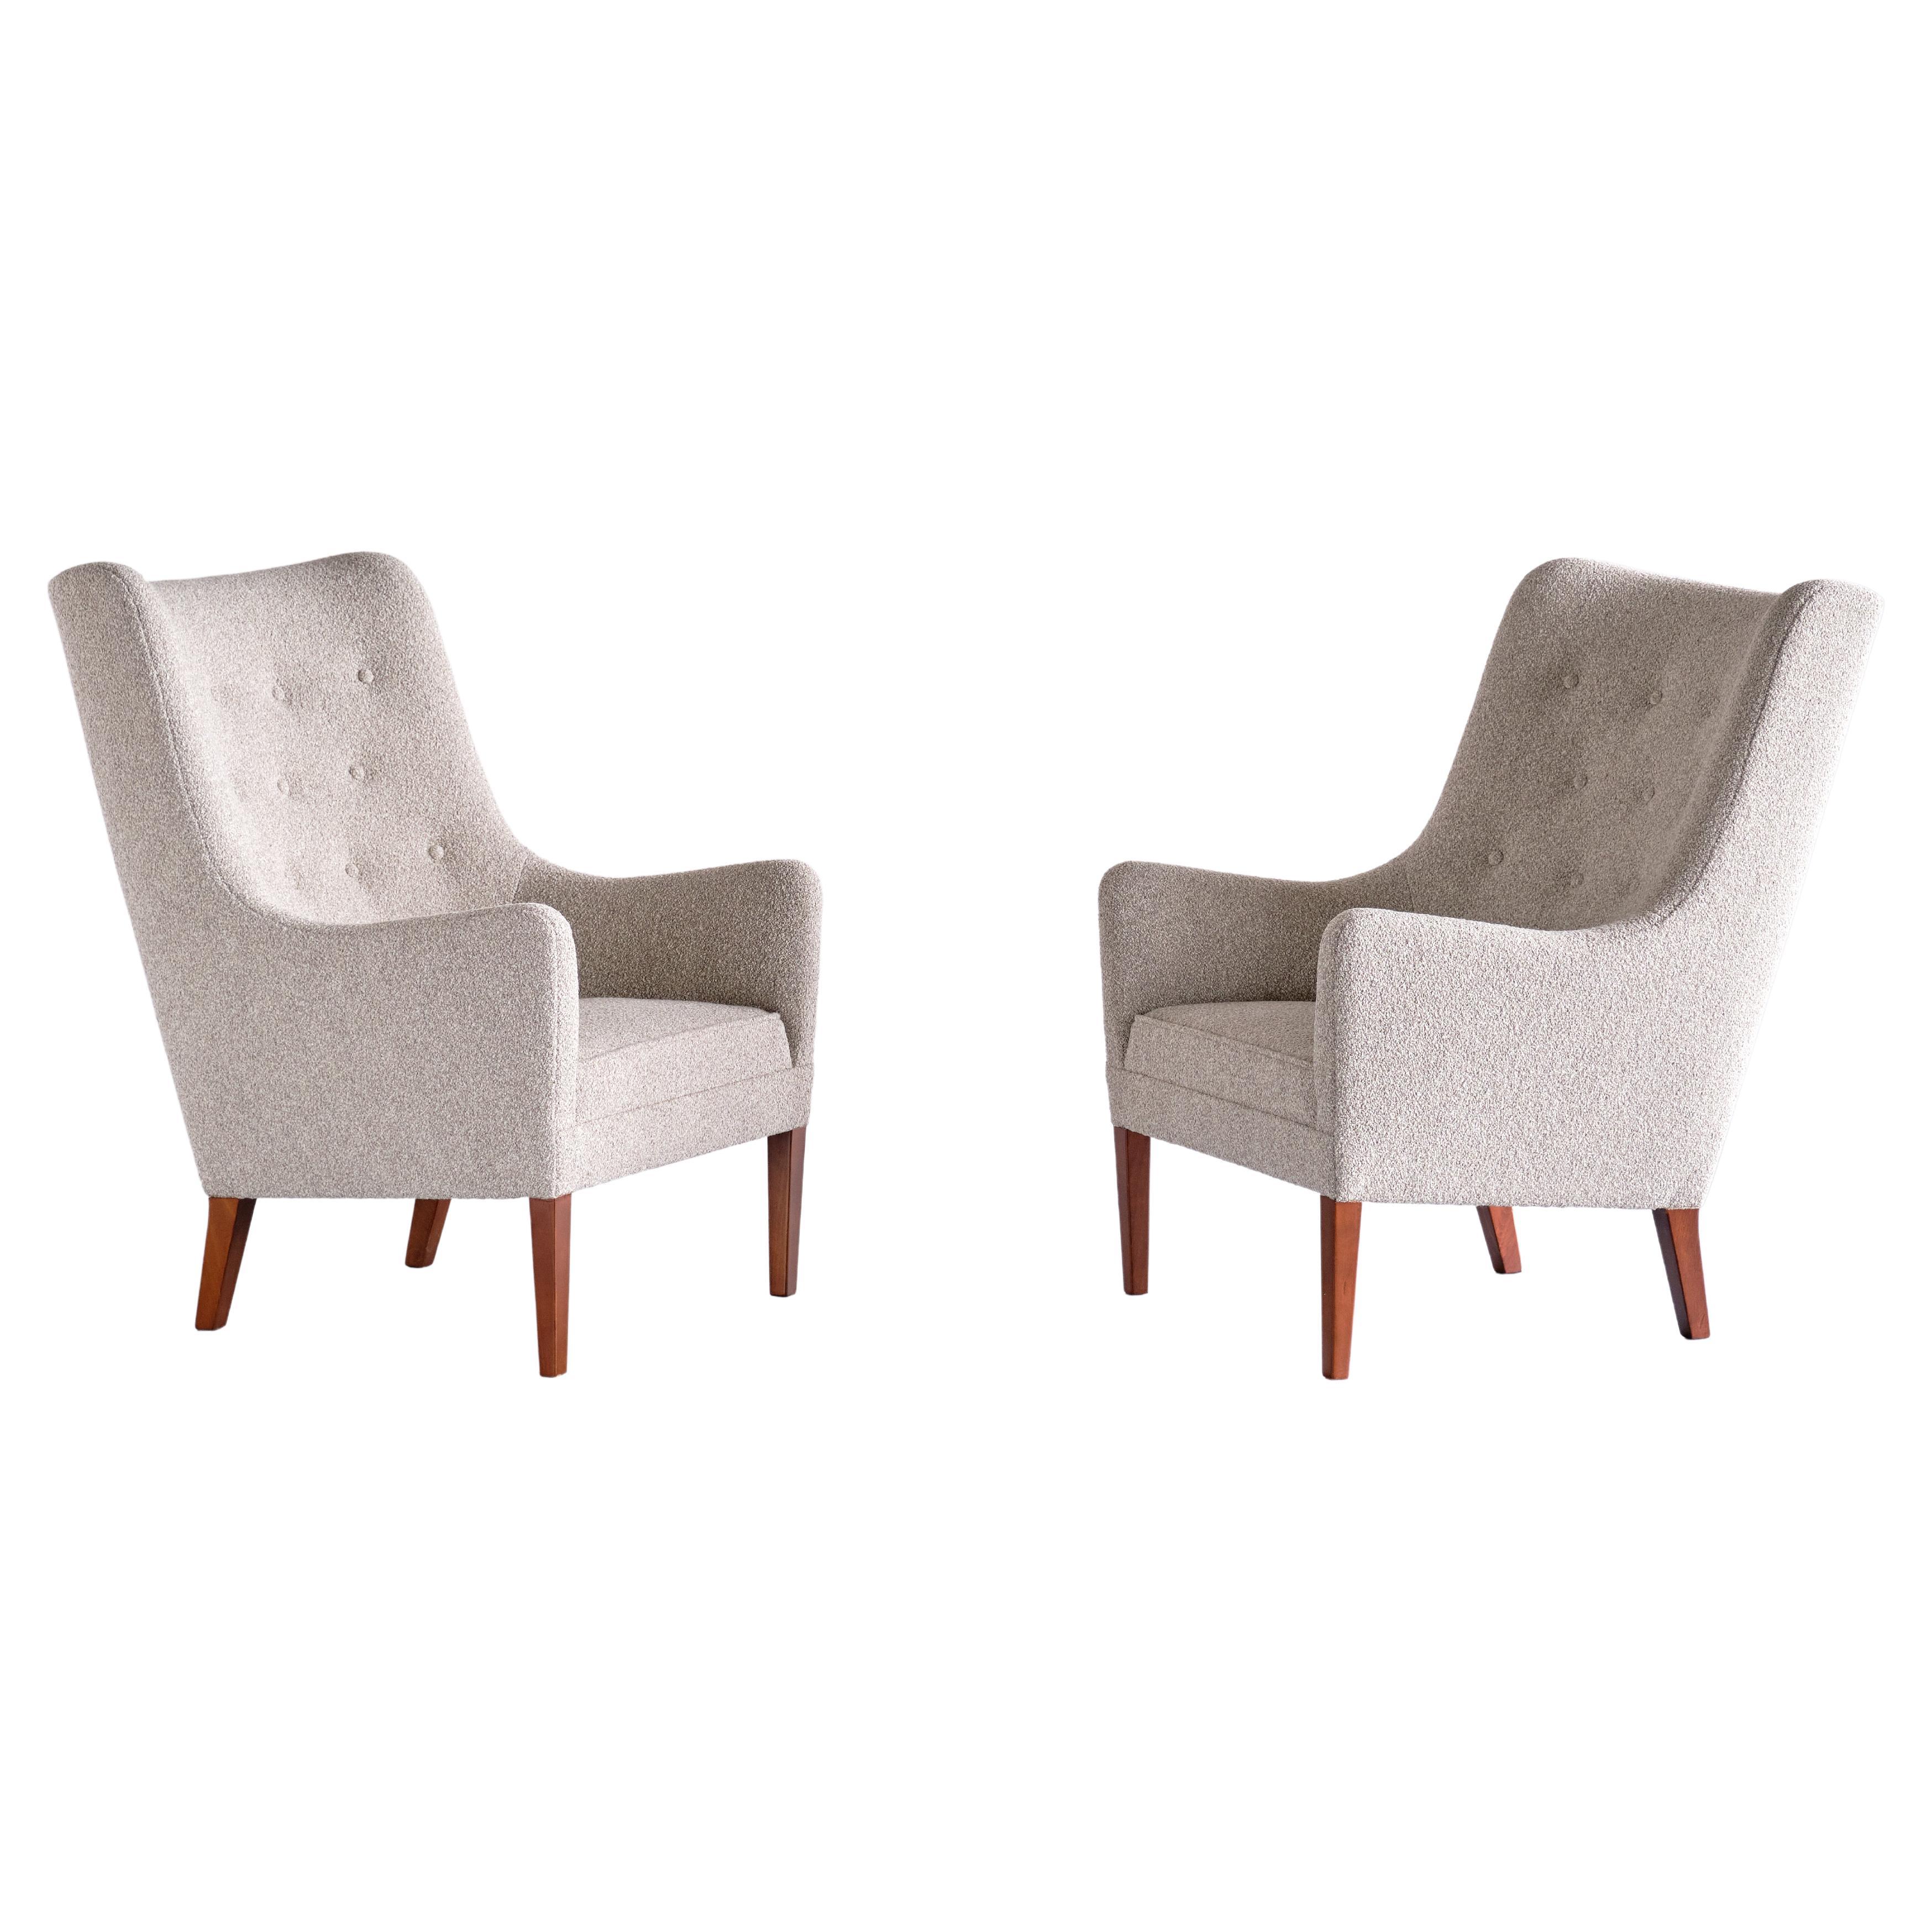 Pair of Jacob Kjær High Back Armchairs in Bouclé and Mahogany, Denmark, 1940s For Sale